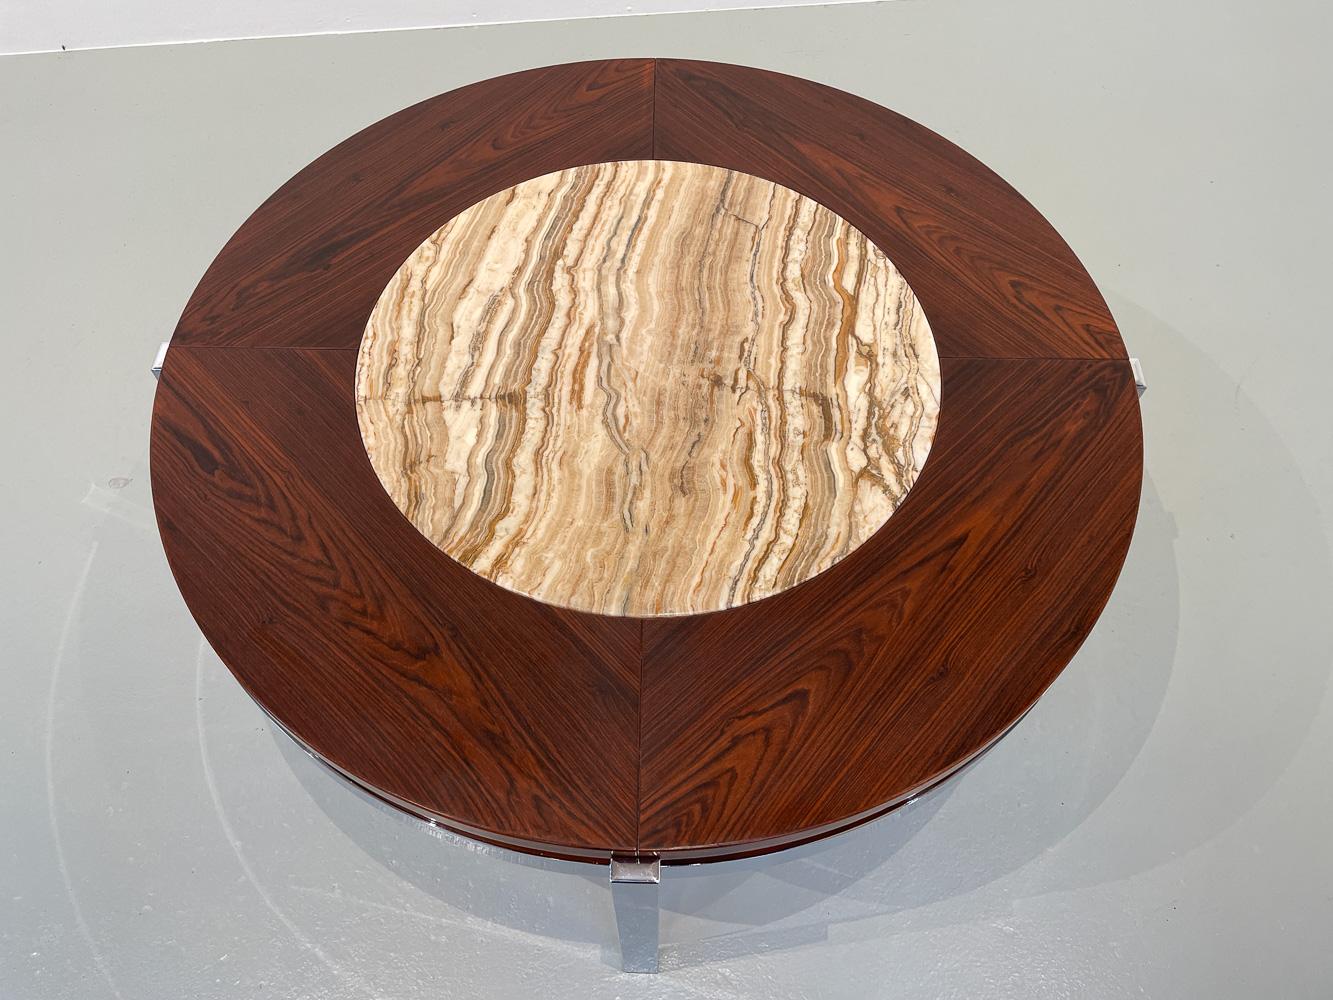 Danish Modern Round Rosewood and Marble Coffee Table by Bendixen Design, 1970s. For Sale 6